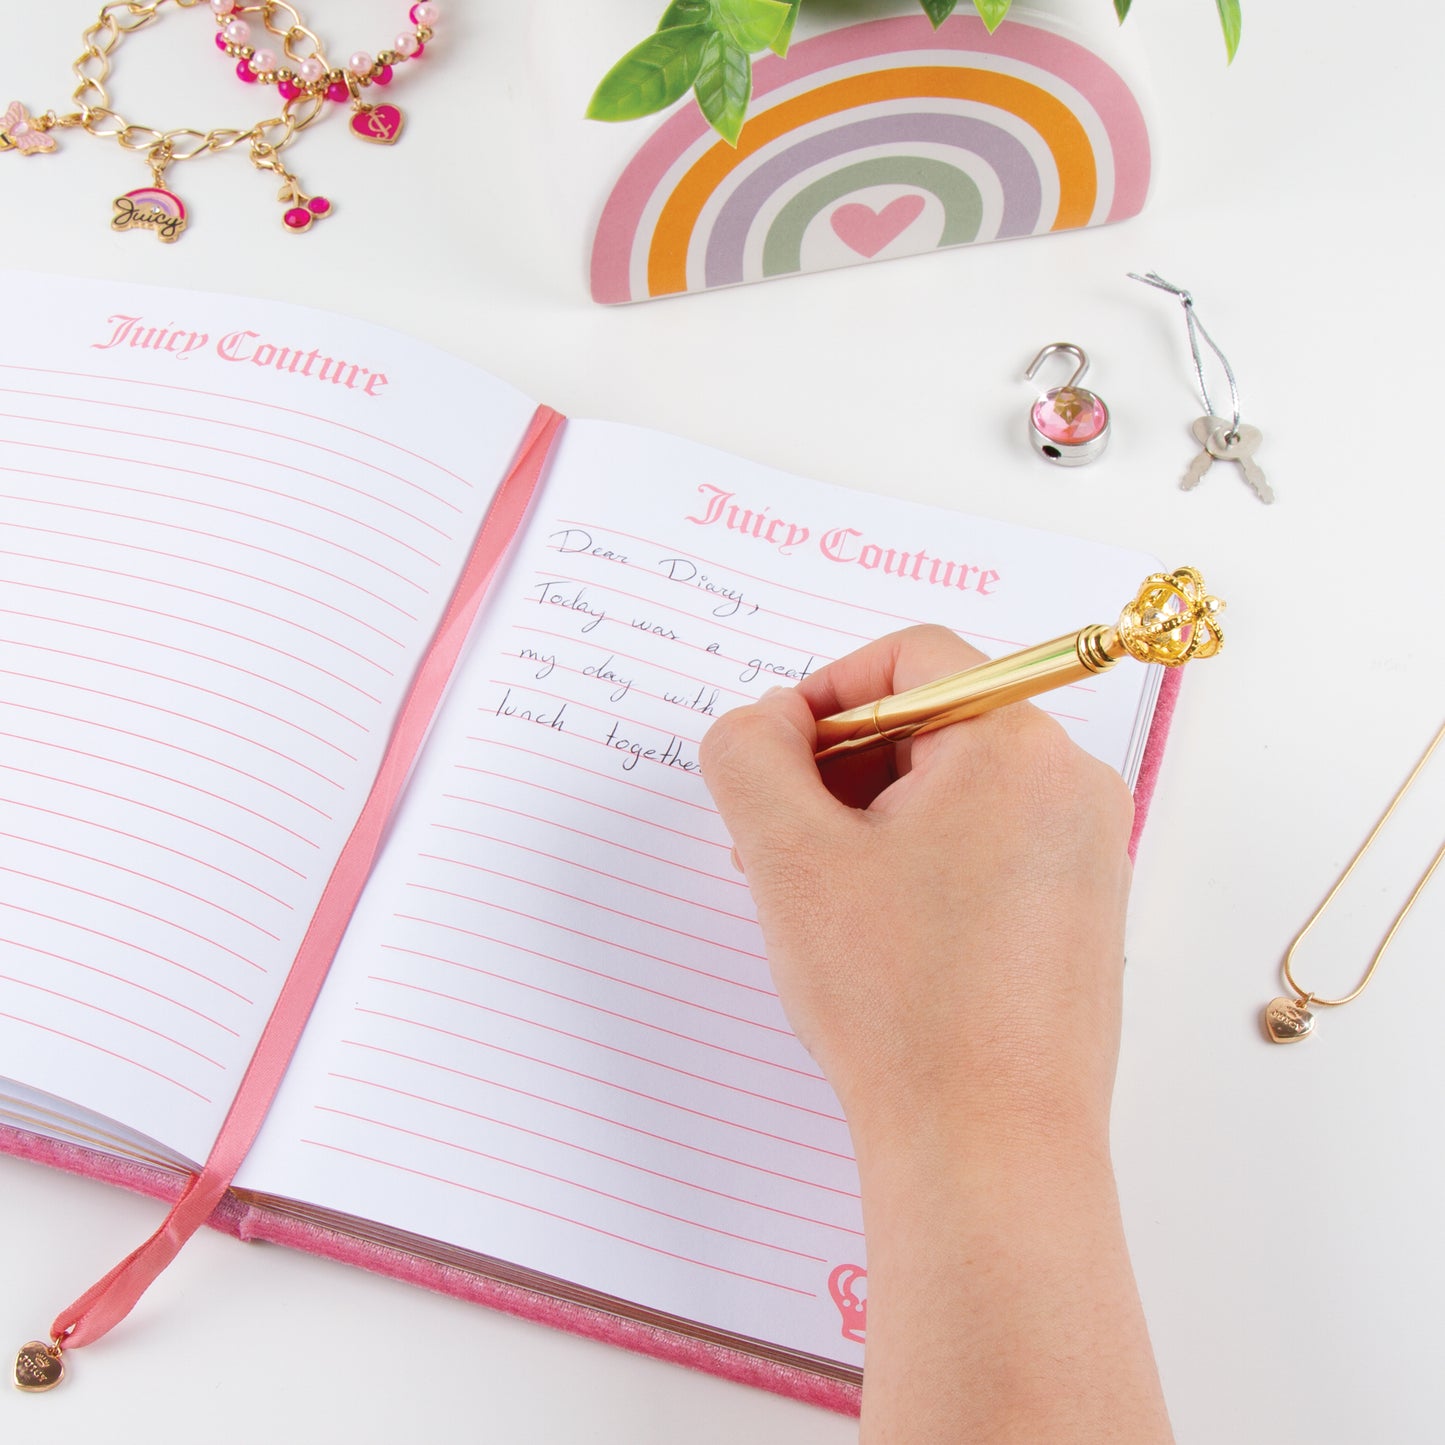 Juicy Couture™ Journal and Necklace Set